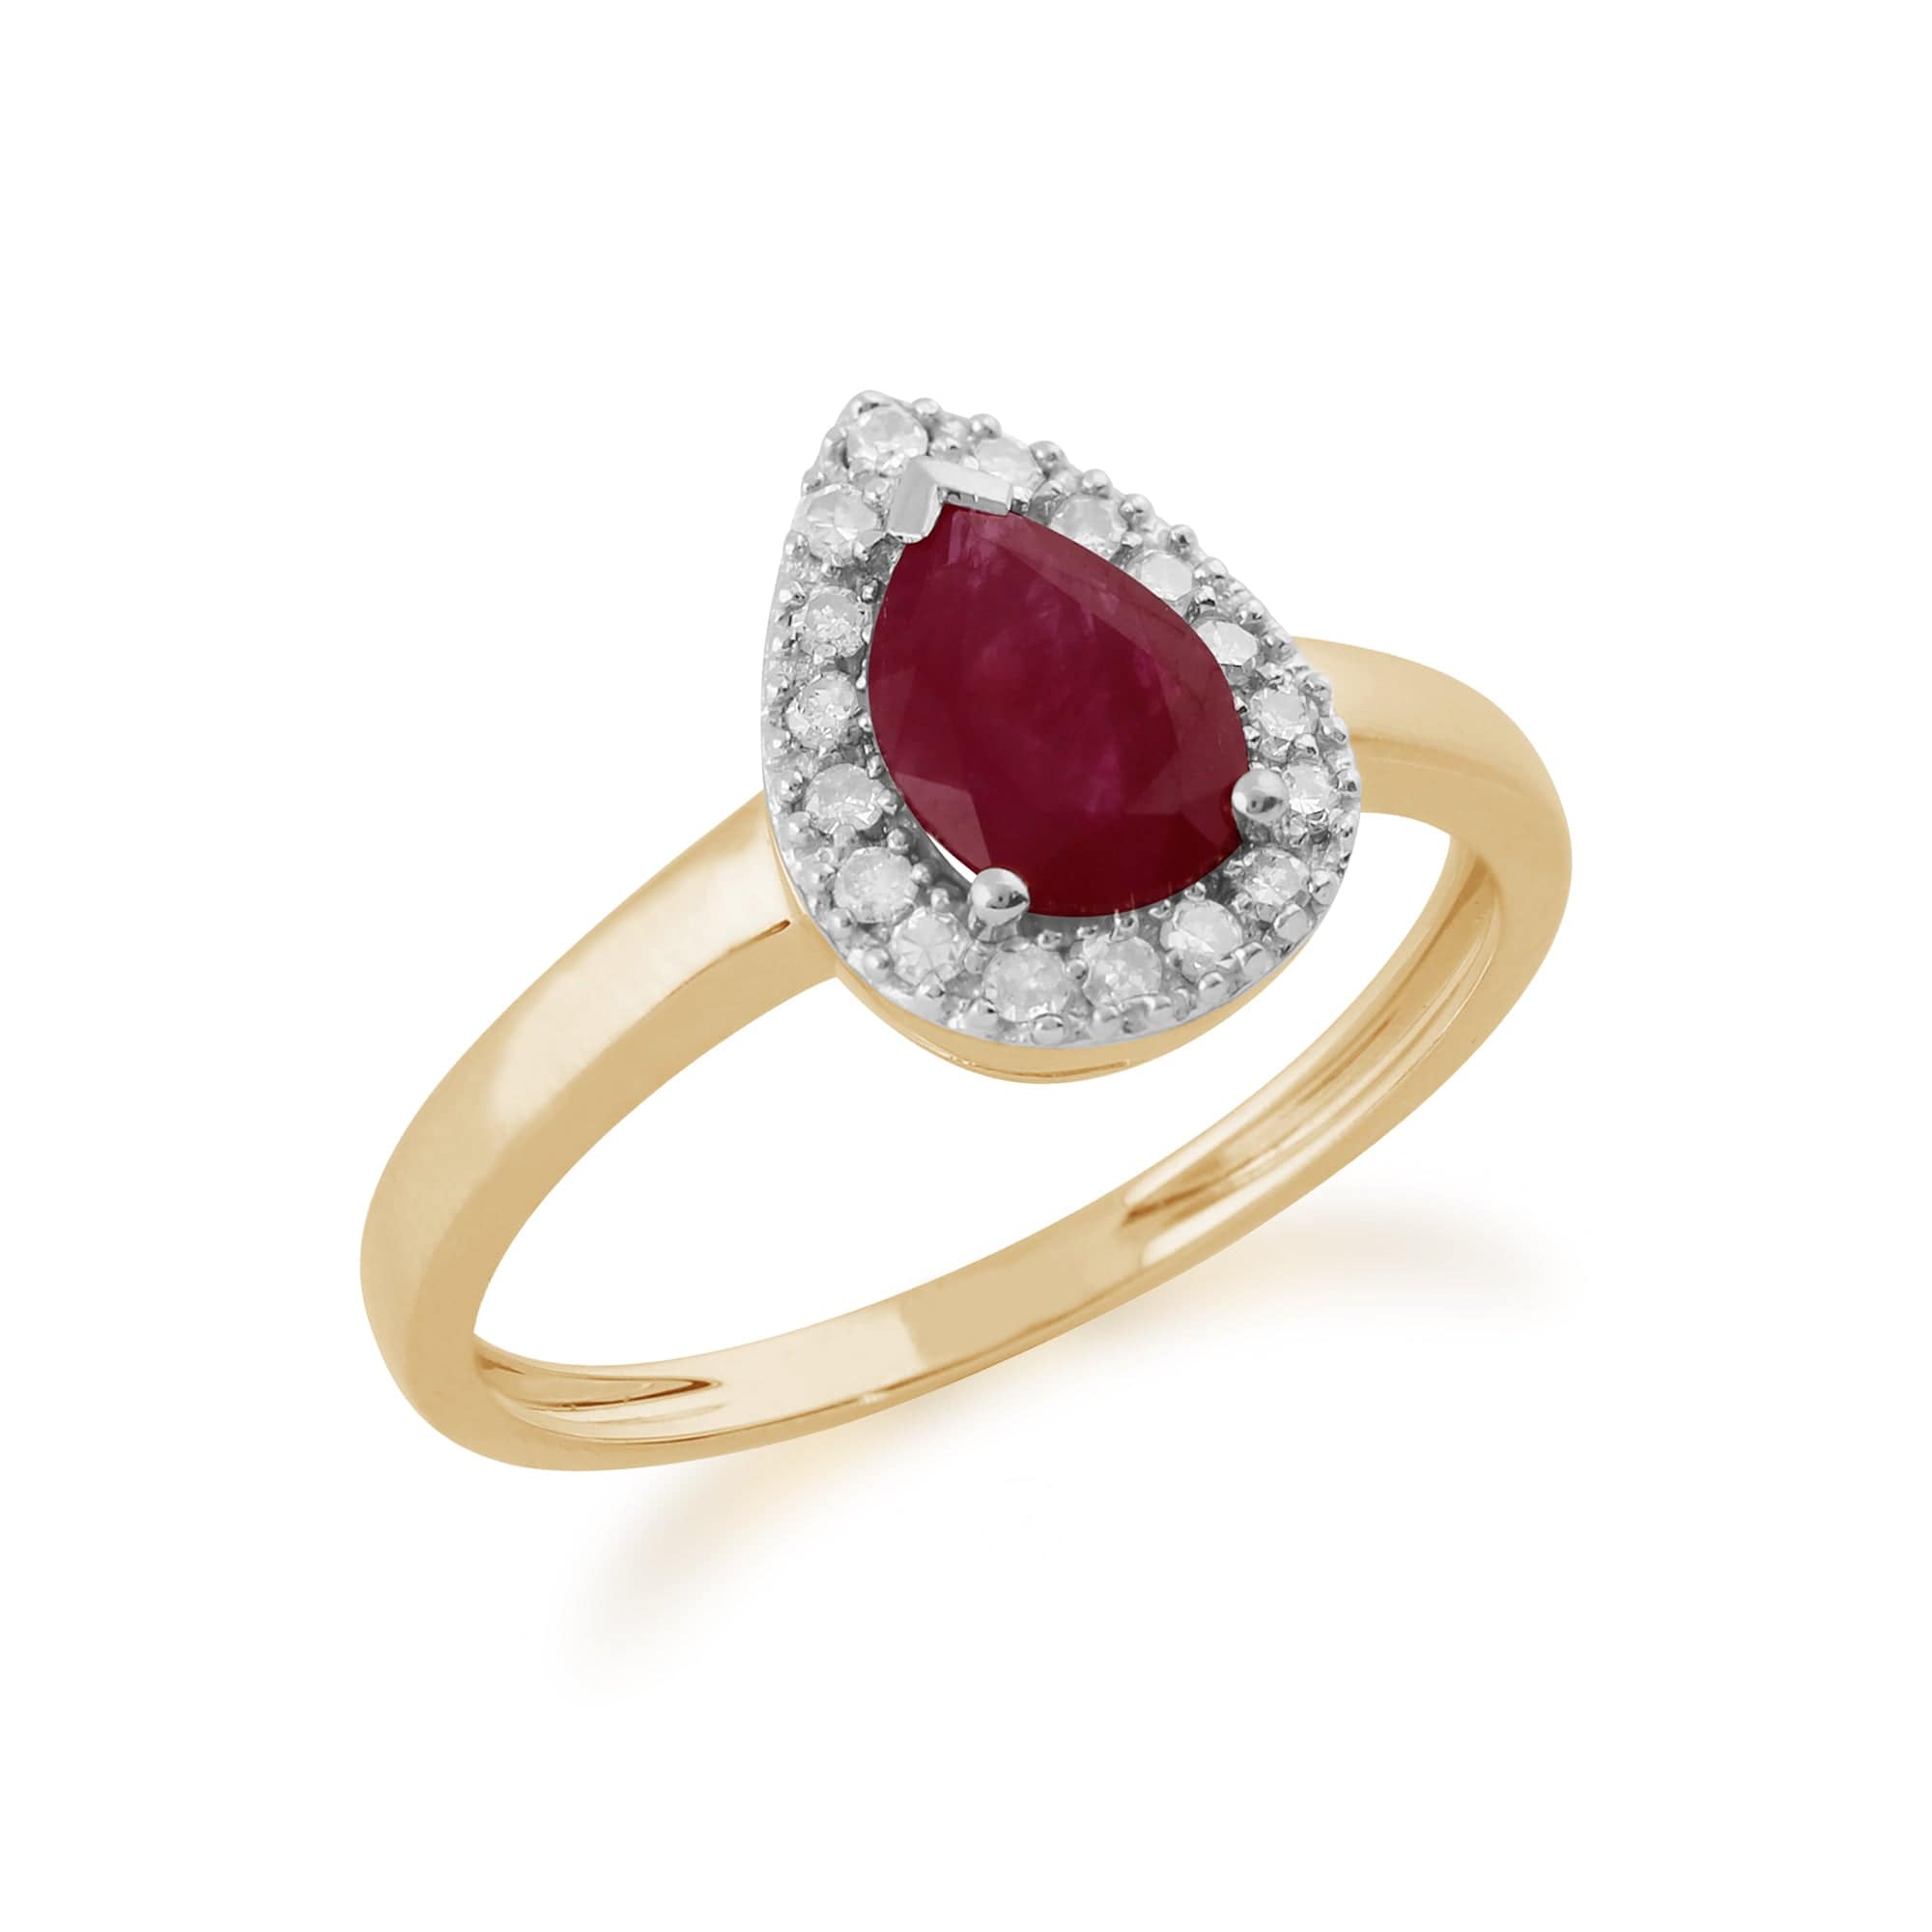 22617 Classic Pear Shaped Ruby & Diamond Ring in 9ct Yellow Gold 2